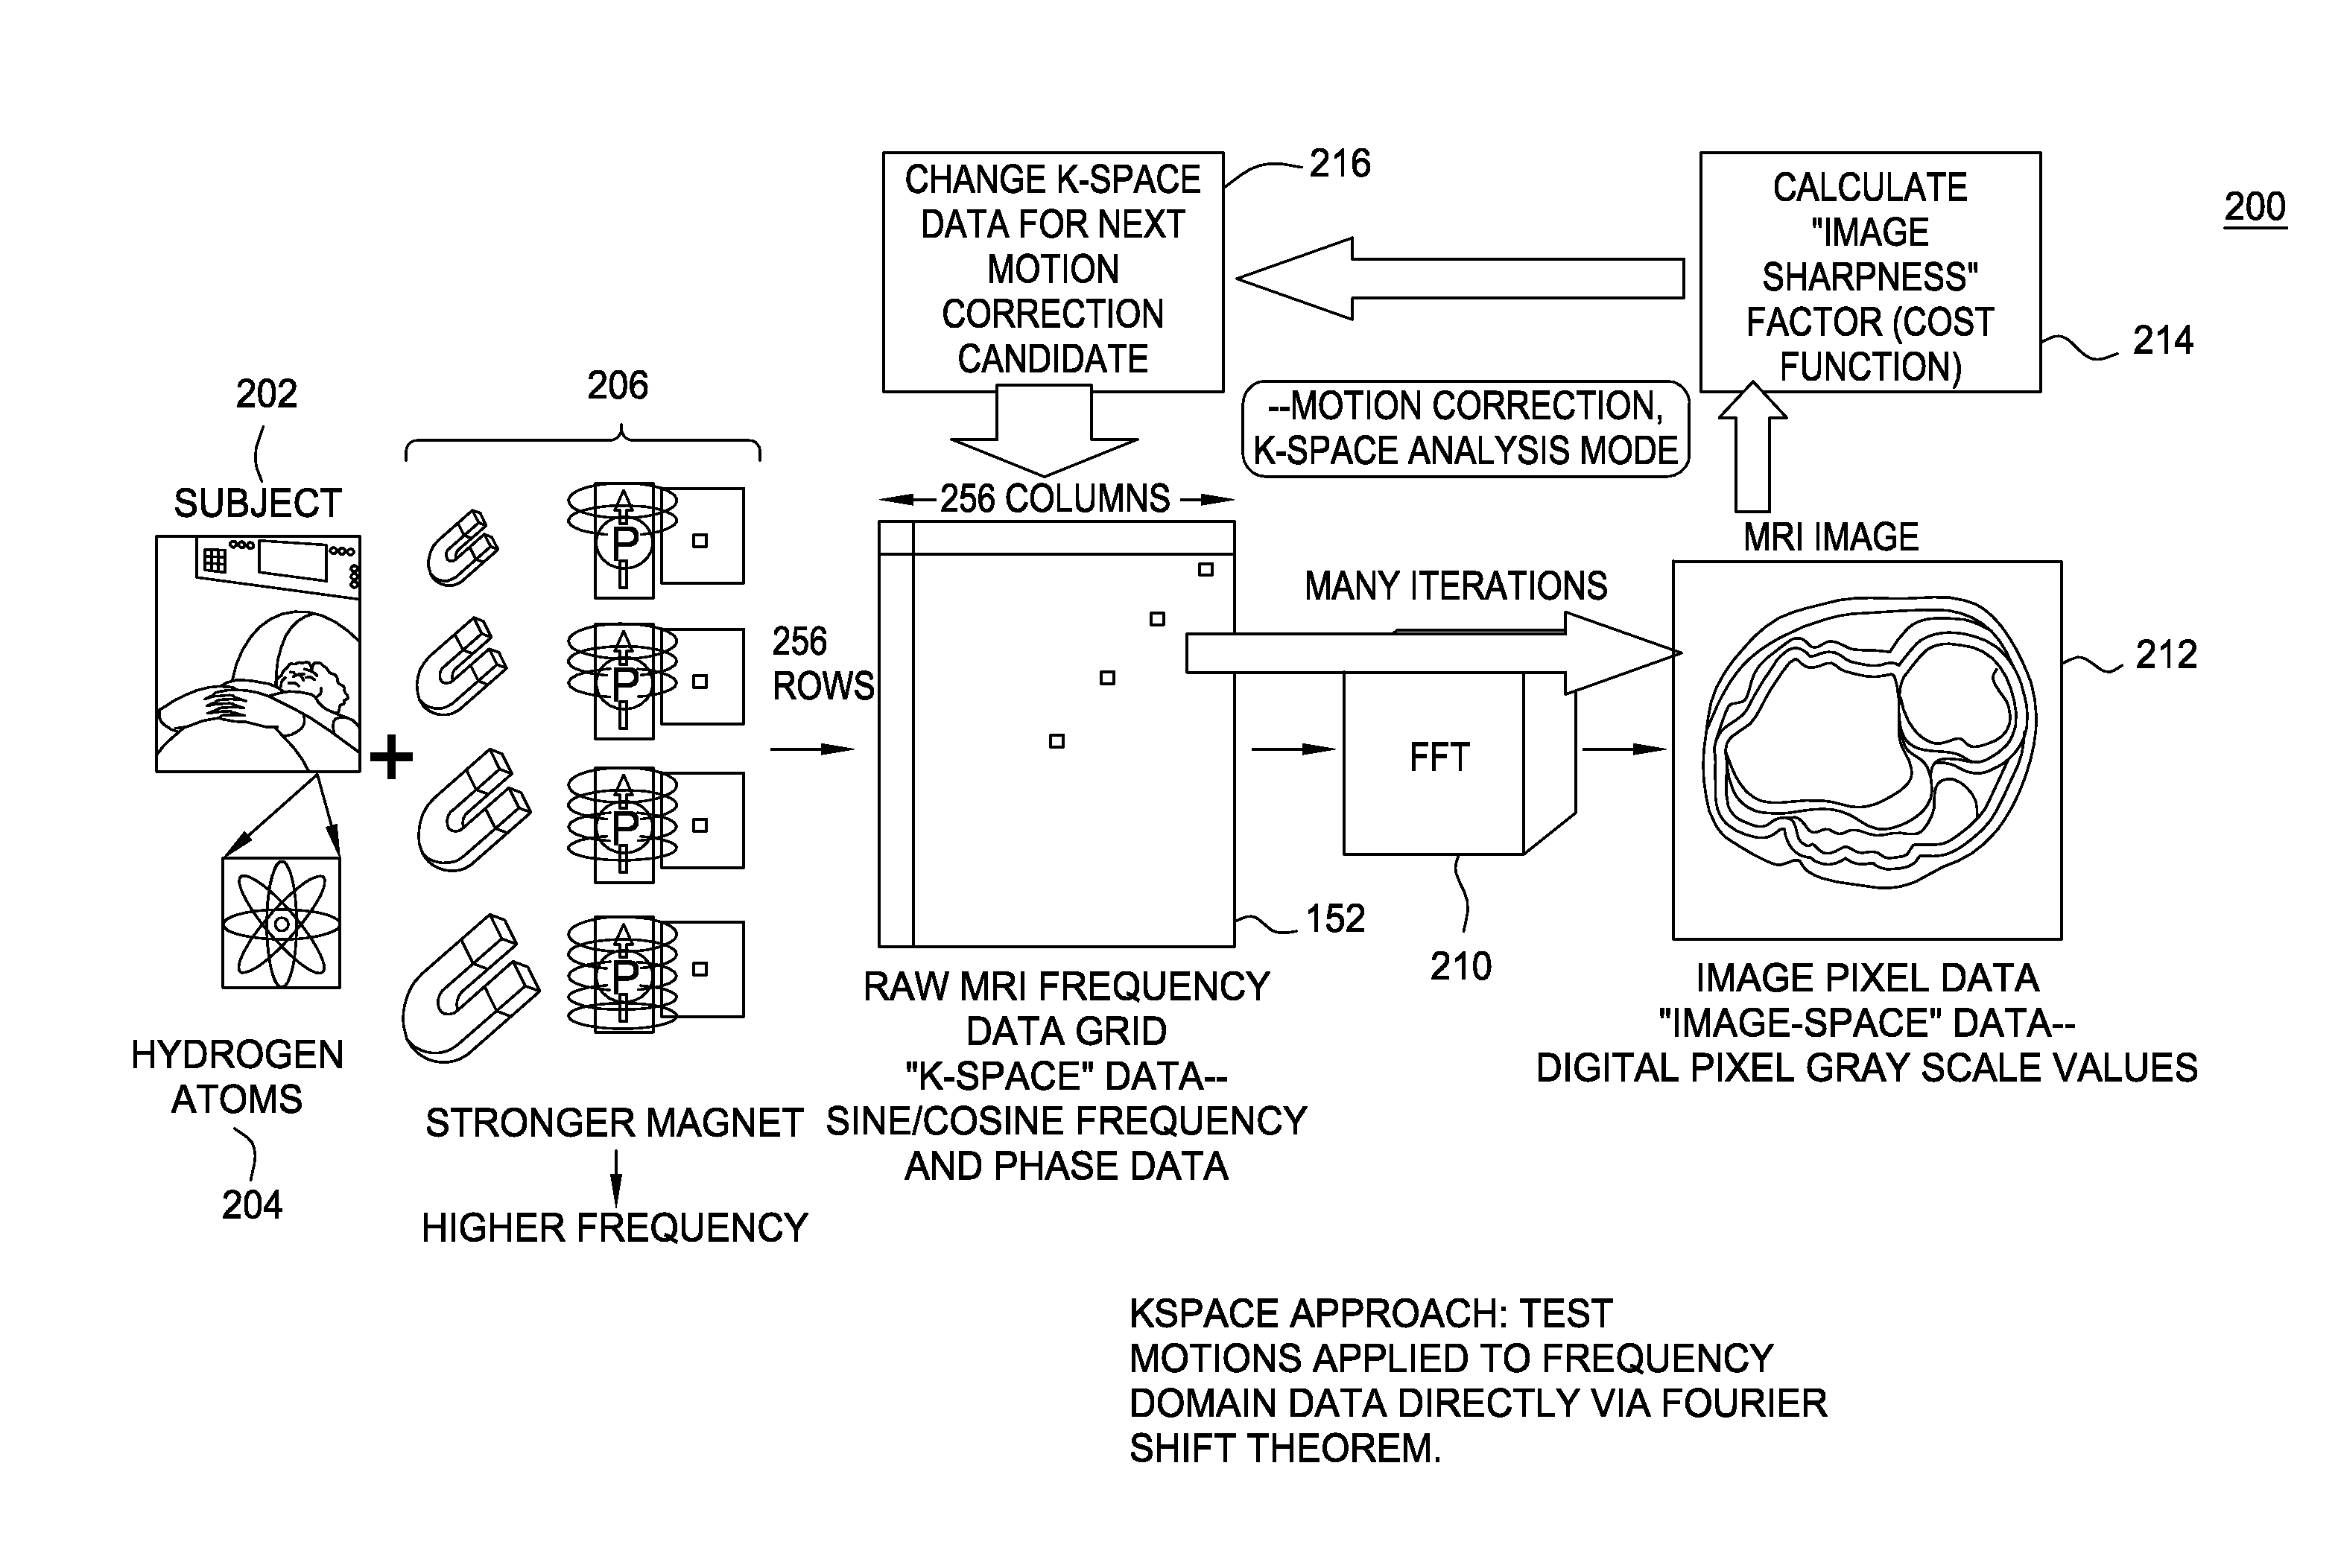 Motion information capture and automatic motion correction for imaging systems